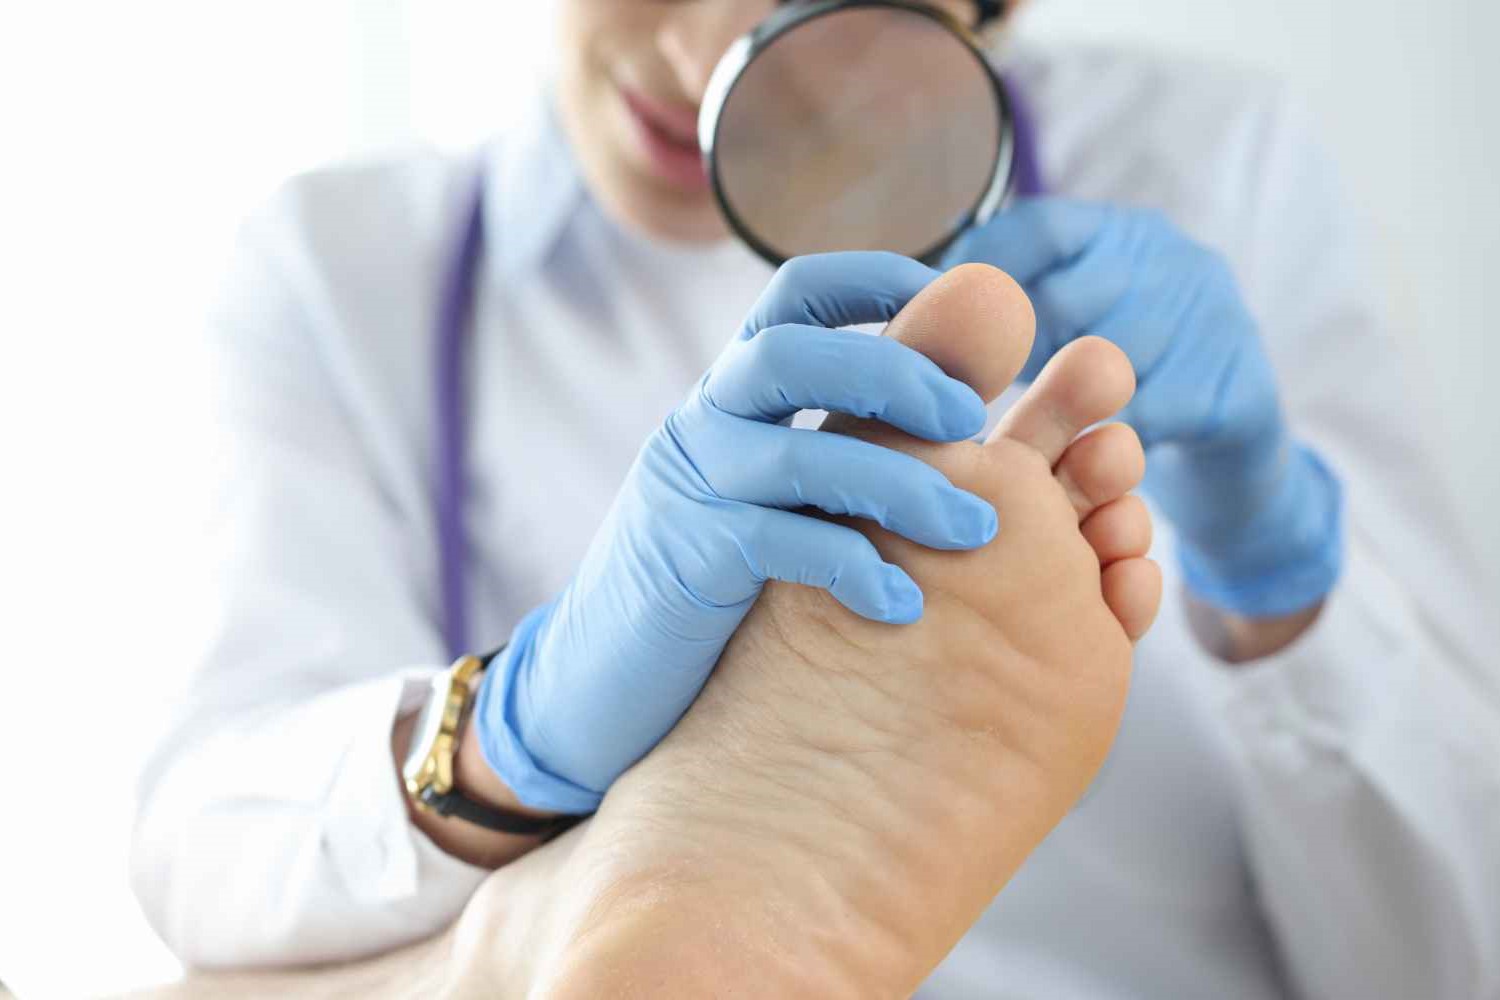 Fungal Therapy: Utilizing Blue Light For Treating Toenail Fungus